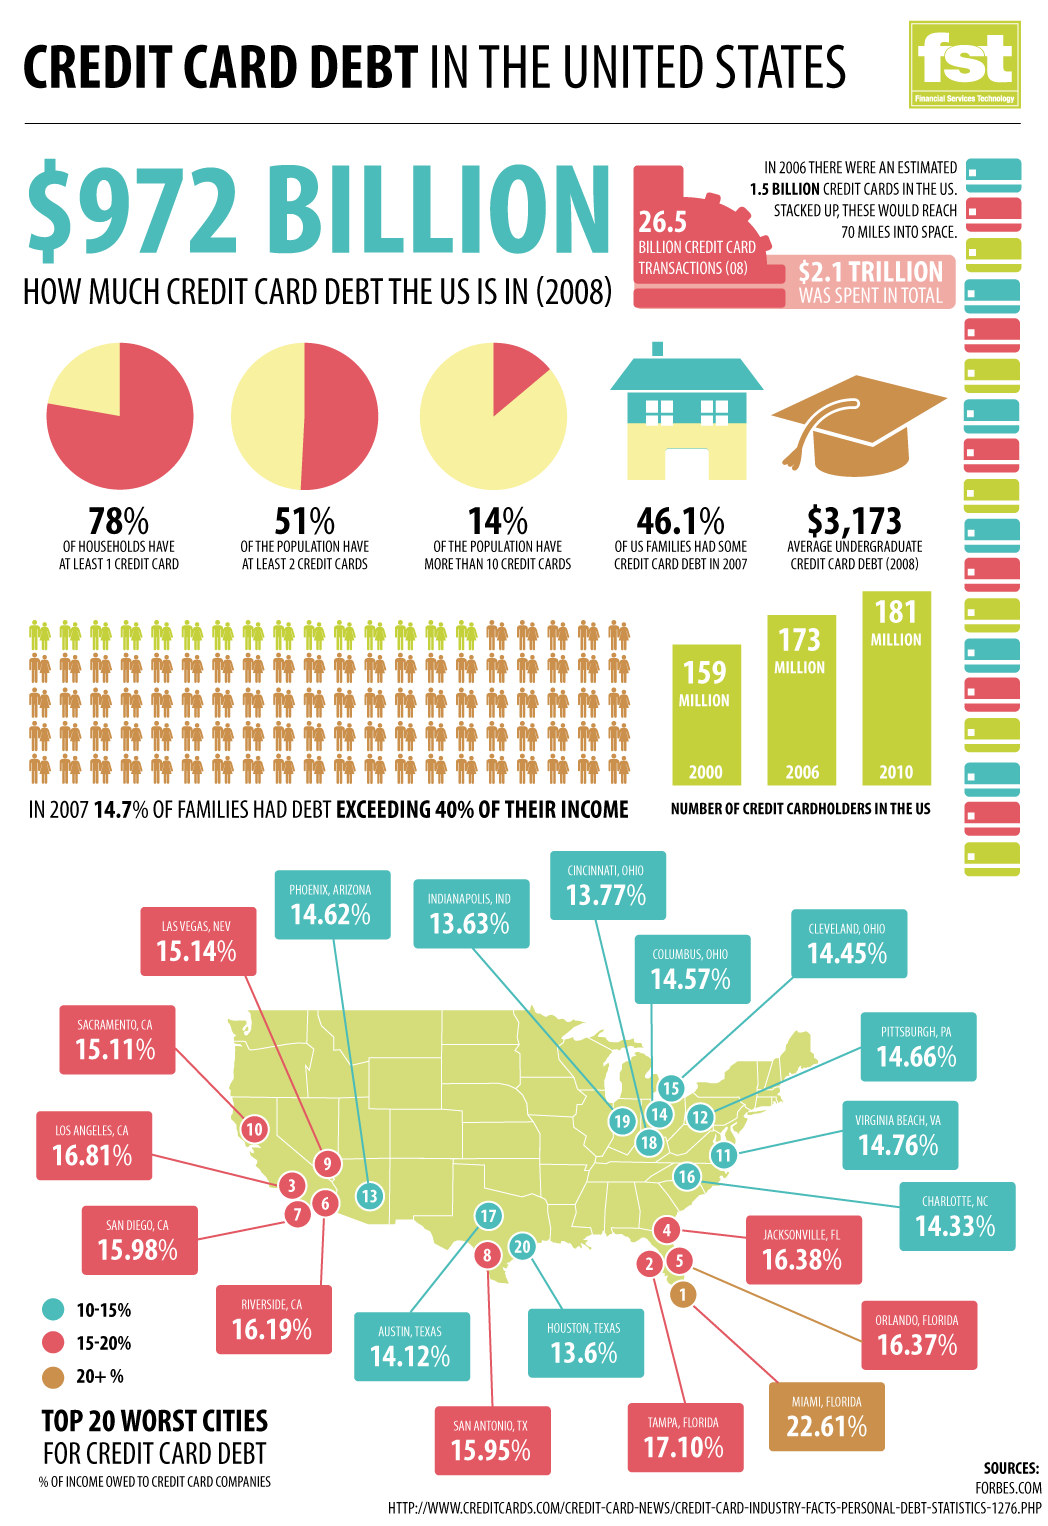 Info graphic illustrating credit card use in the United States. The document uses pie charts, a map of the U.S., bar graphics, etc. to represent data visually.